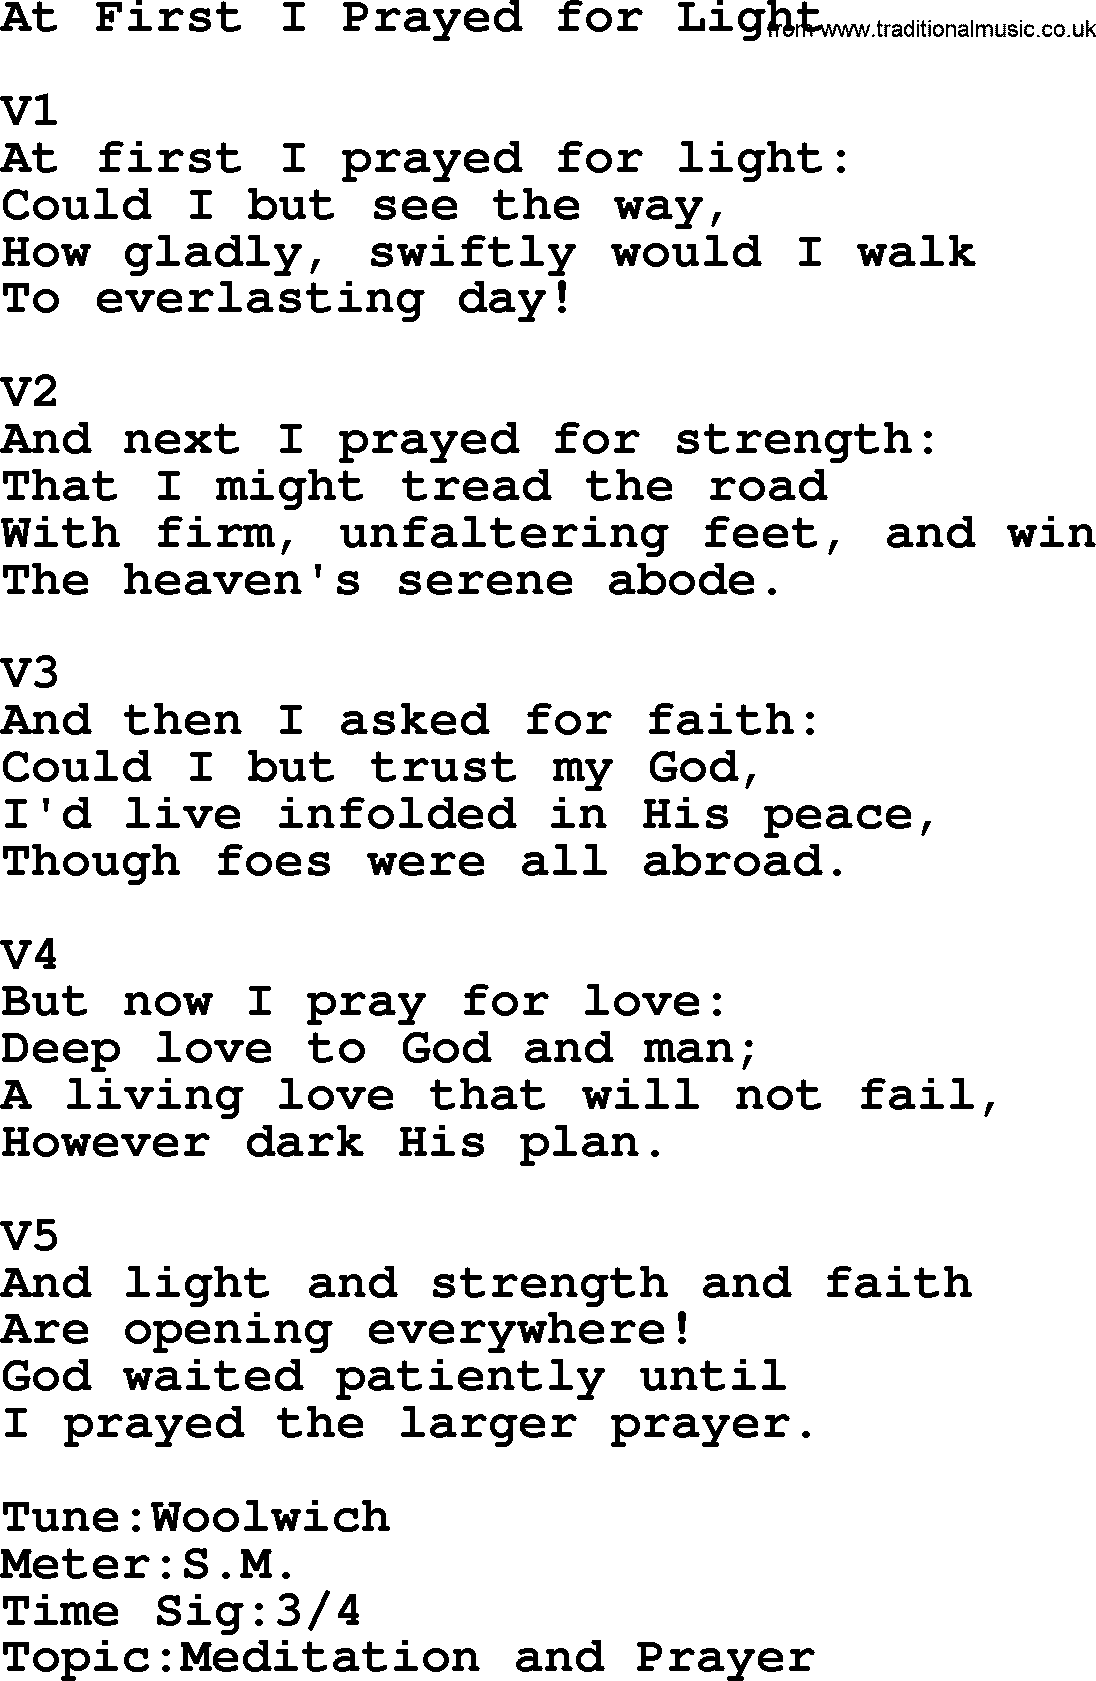 Adventist Hynms collection, Hymn: At First I Prayed For Light, lyrics with PDF